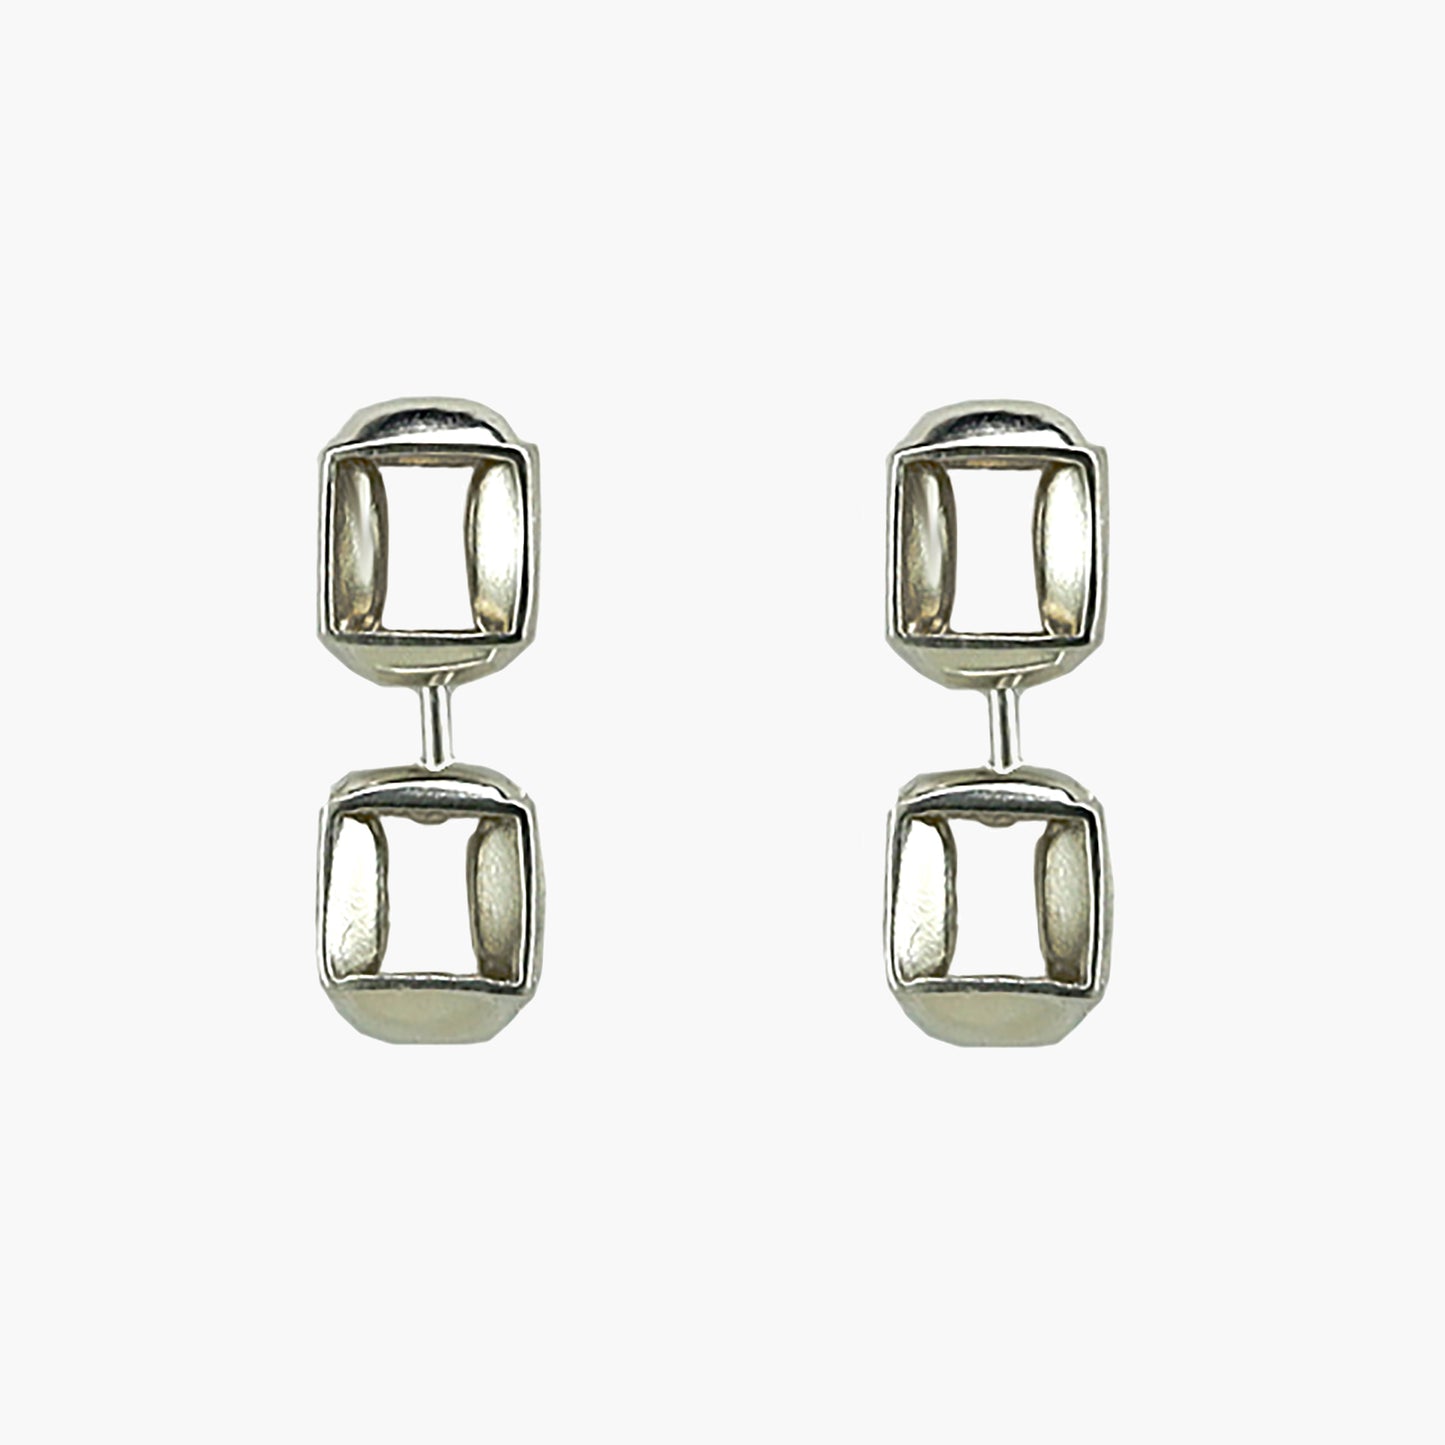 Sterling silver RUDO earrings by Kim Paquet